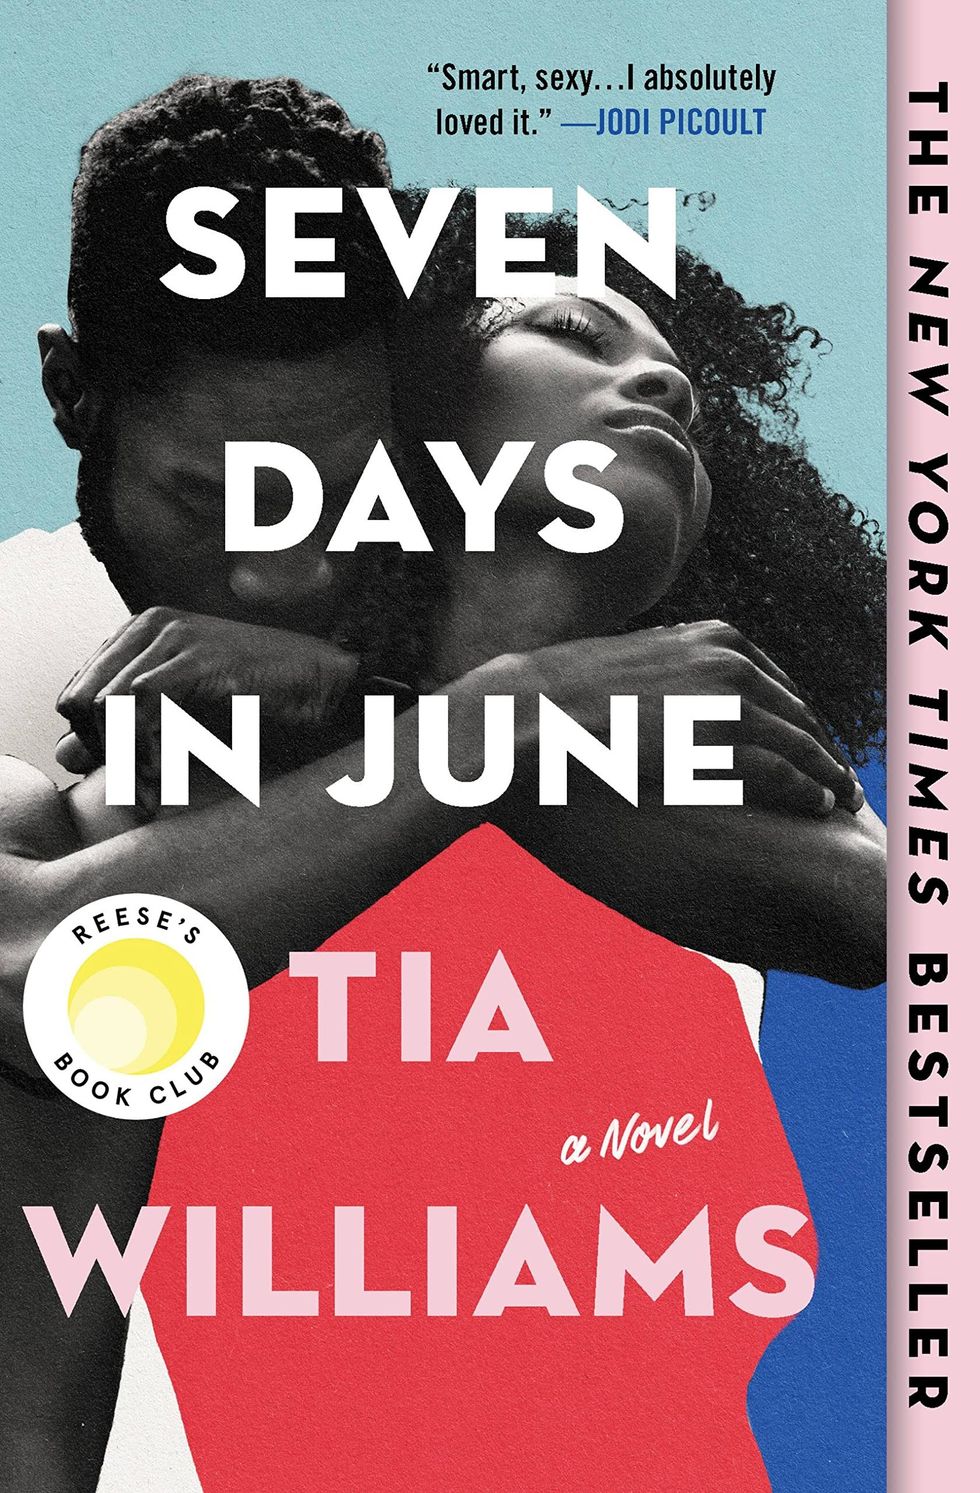 "Seven Days in June" by Tia Williams